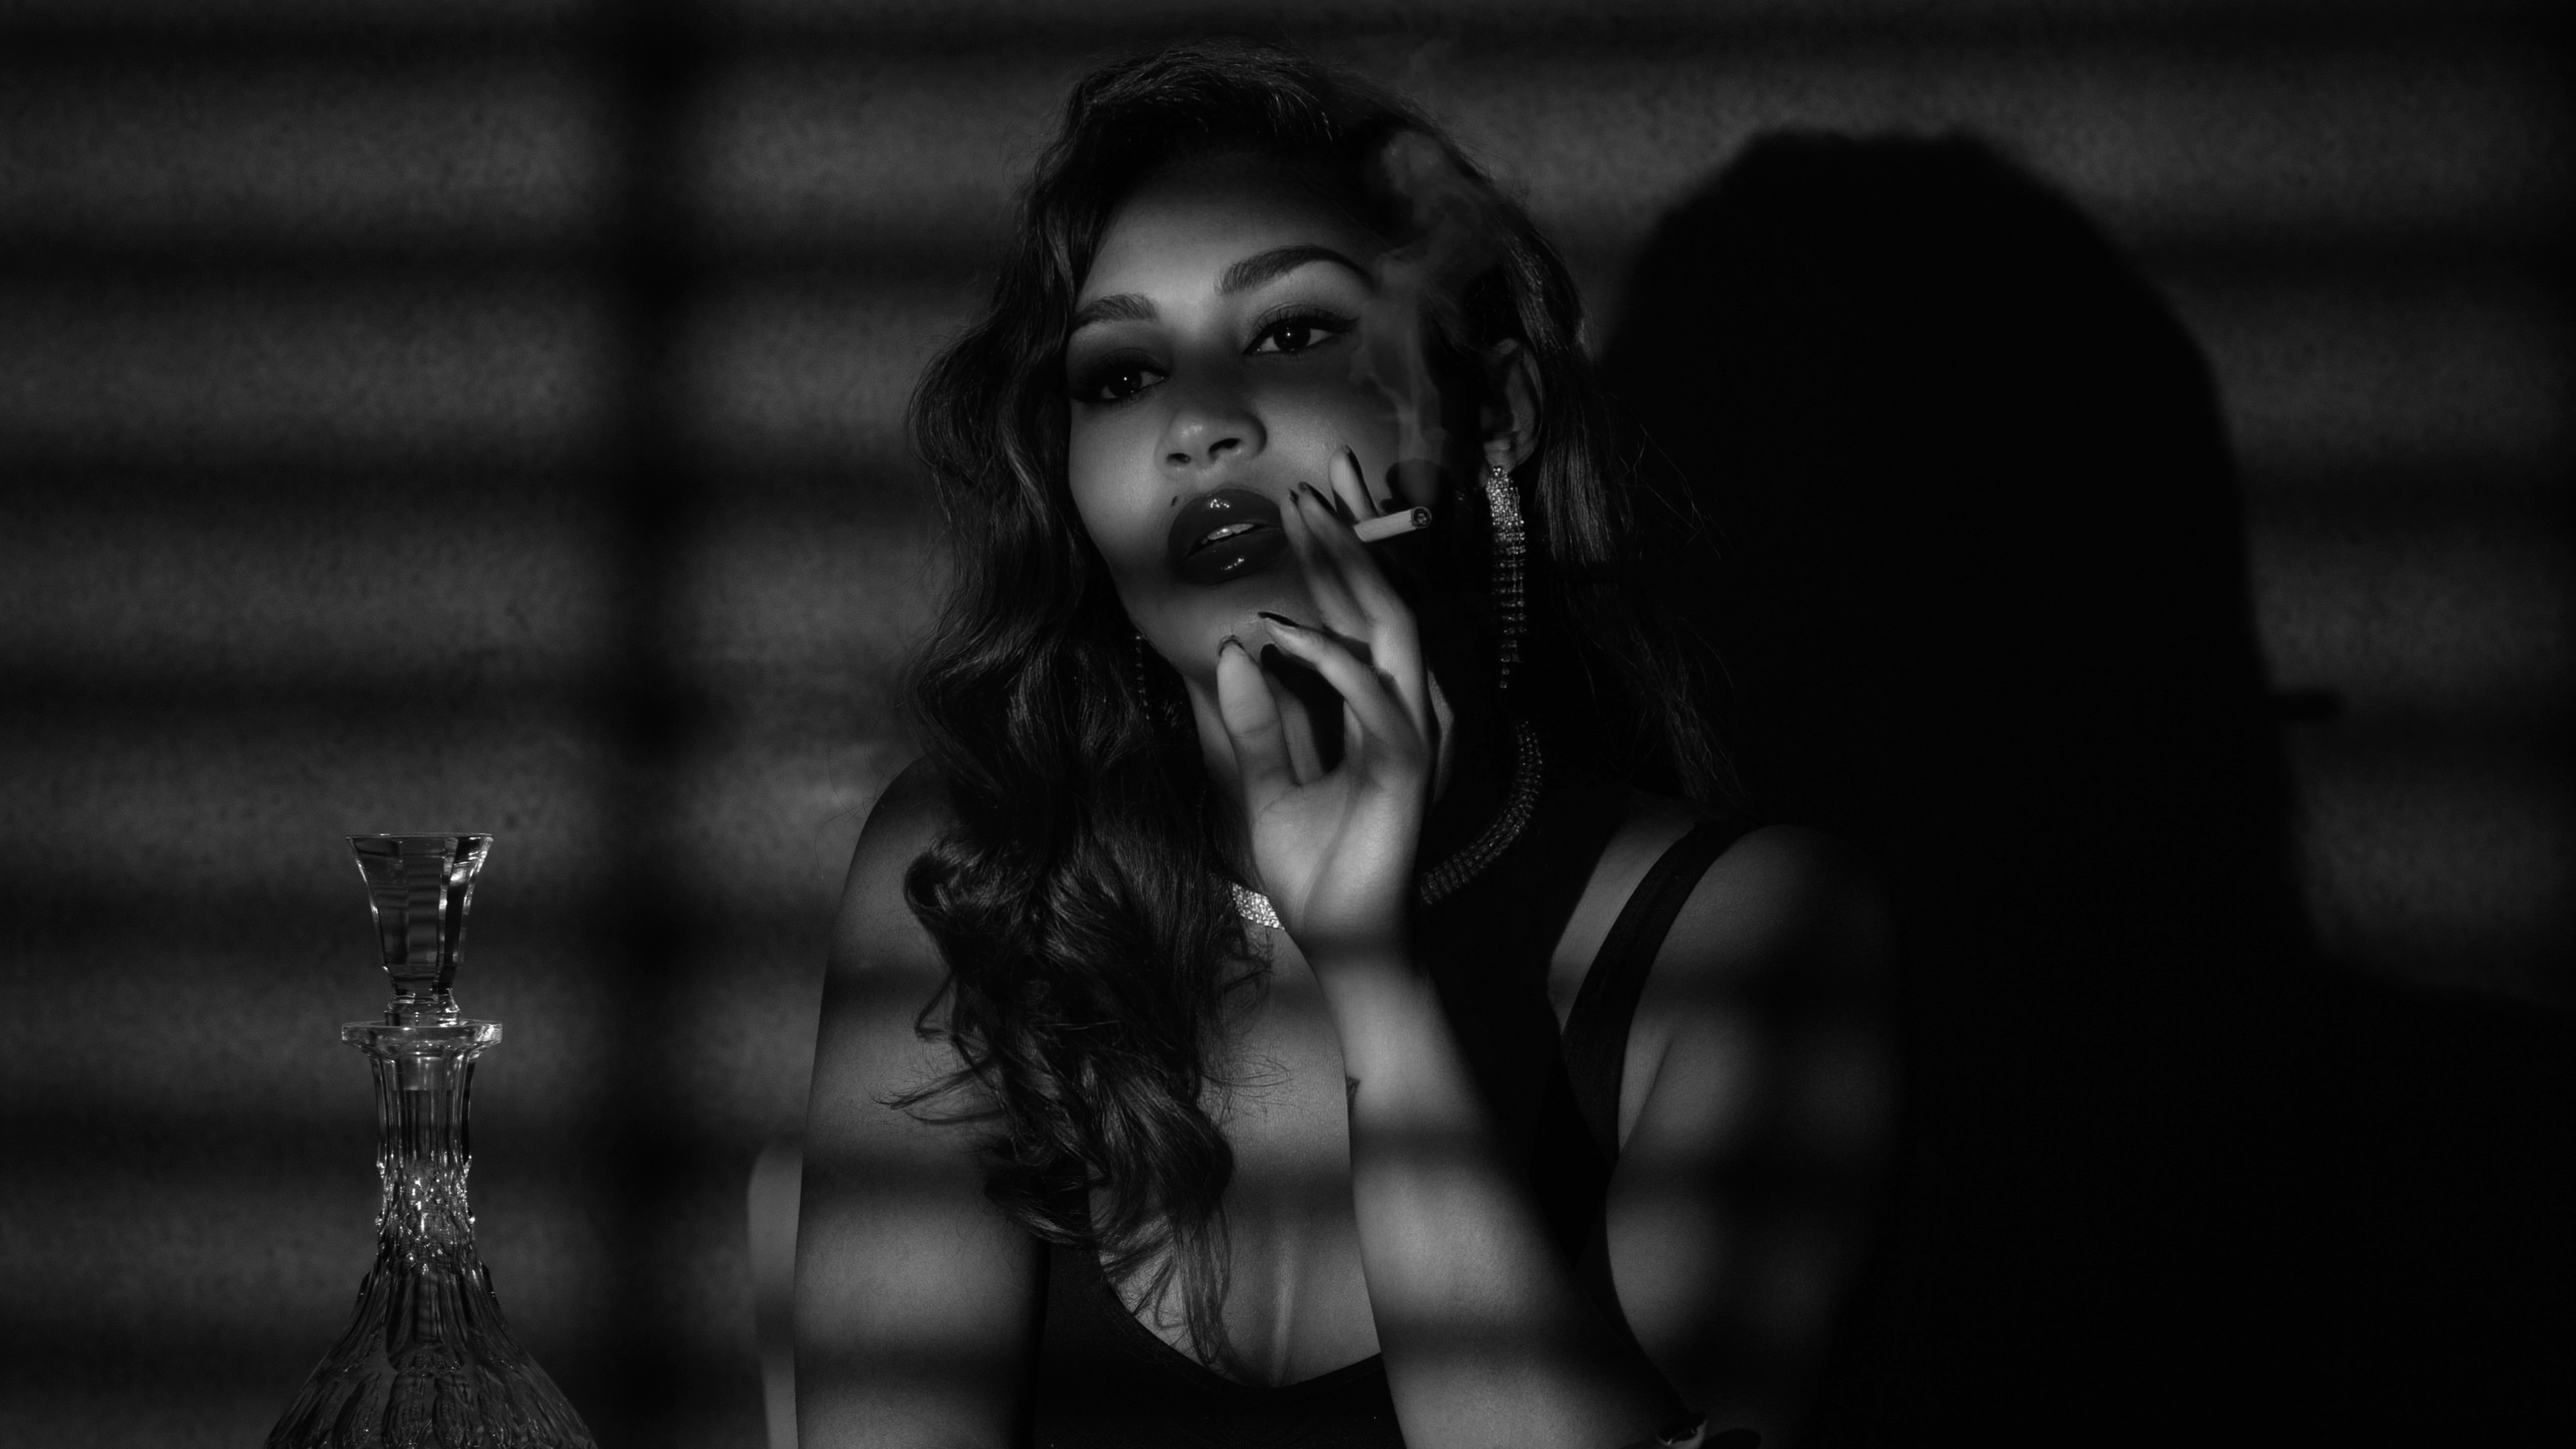 Emulate film noir lighting in a home photography setup, using a